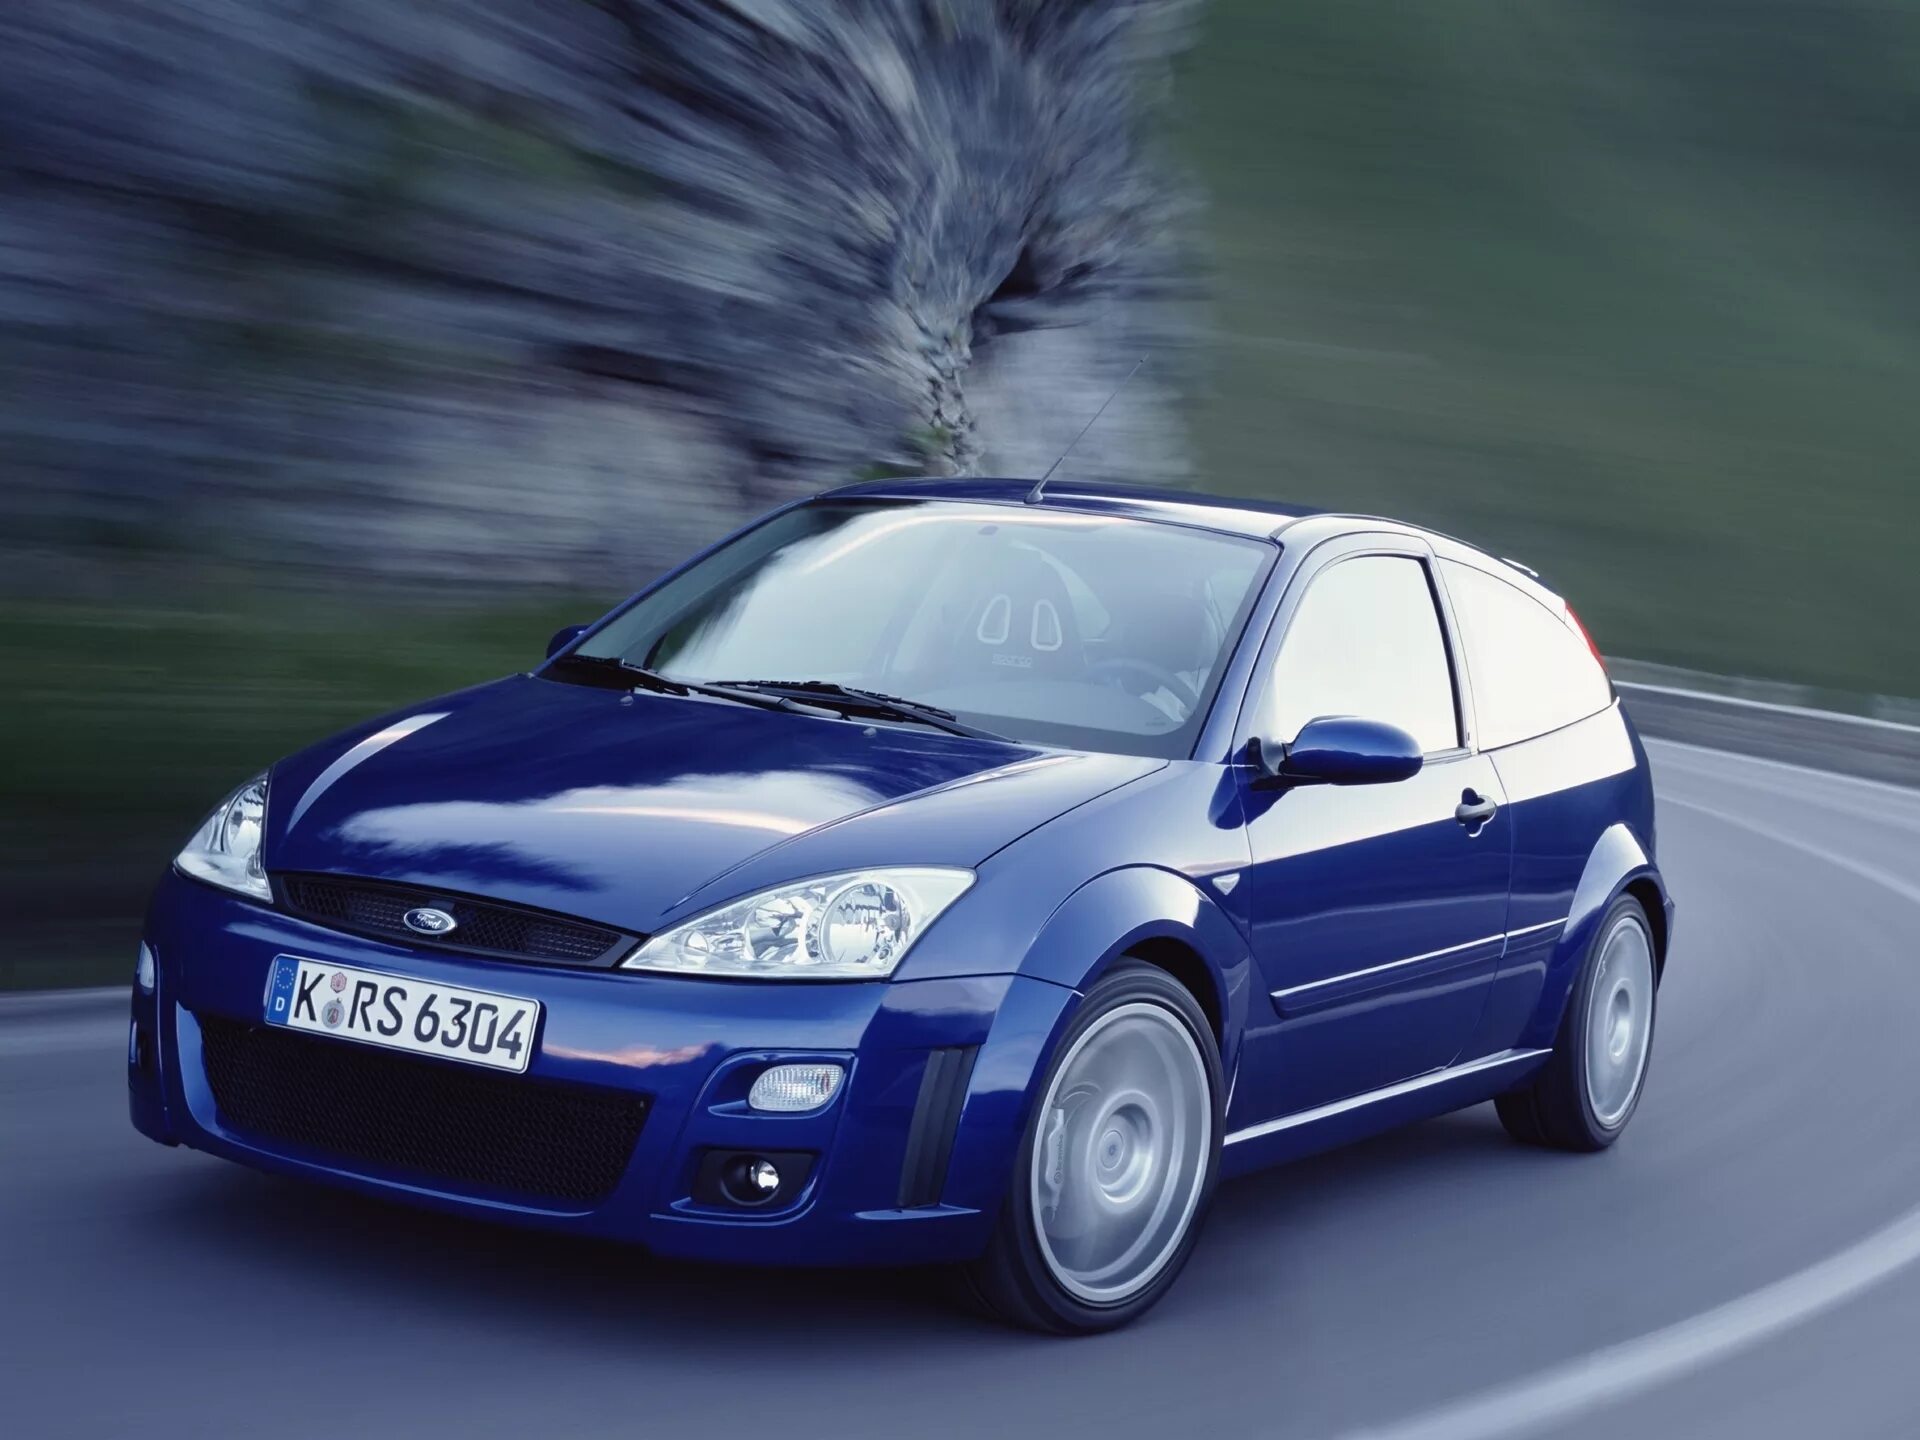 Б у форд фокус 1. Ford Focus RS 2002. Ford Focus RS mk1. Форд фокус 1 поколения. Ford Focus 1 RS.